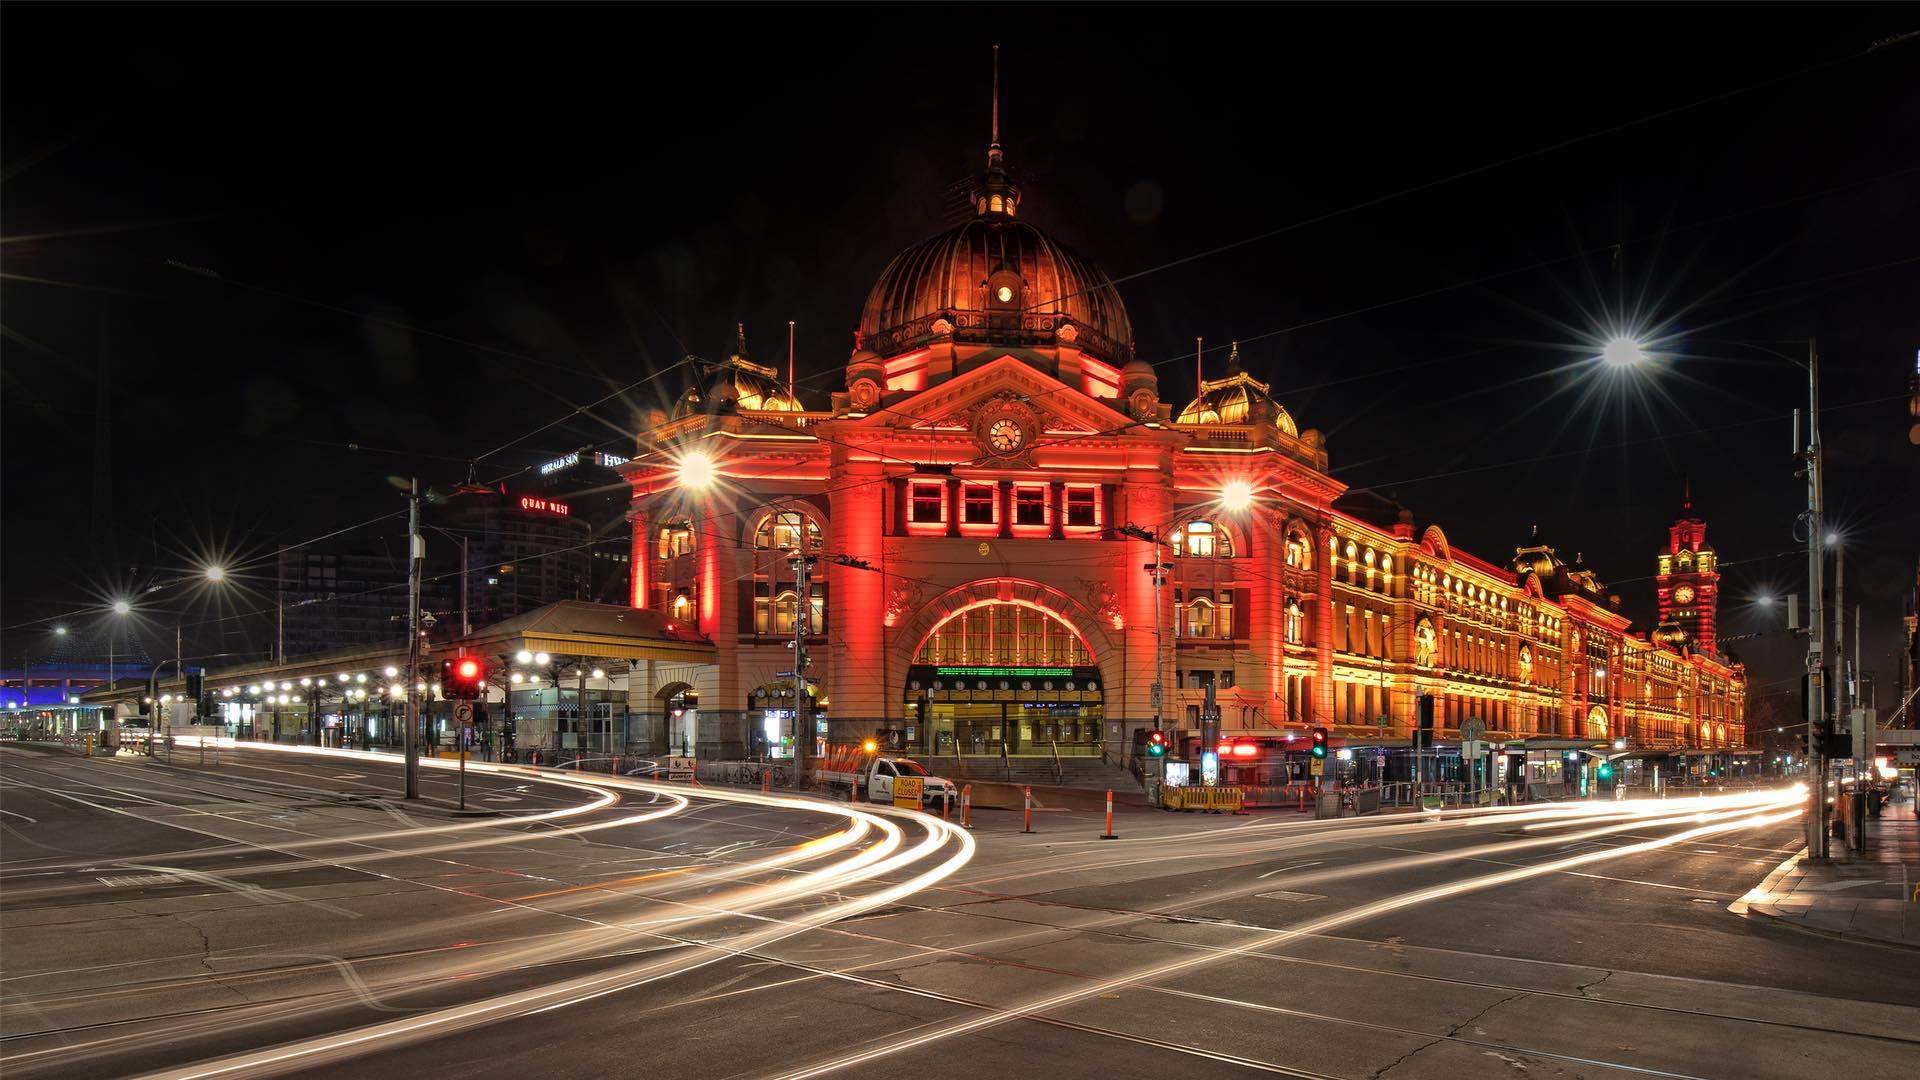 Flinders Street Station Has a Colourful New Light Display